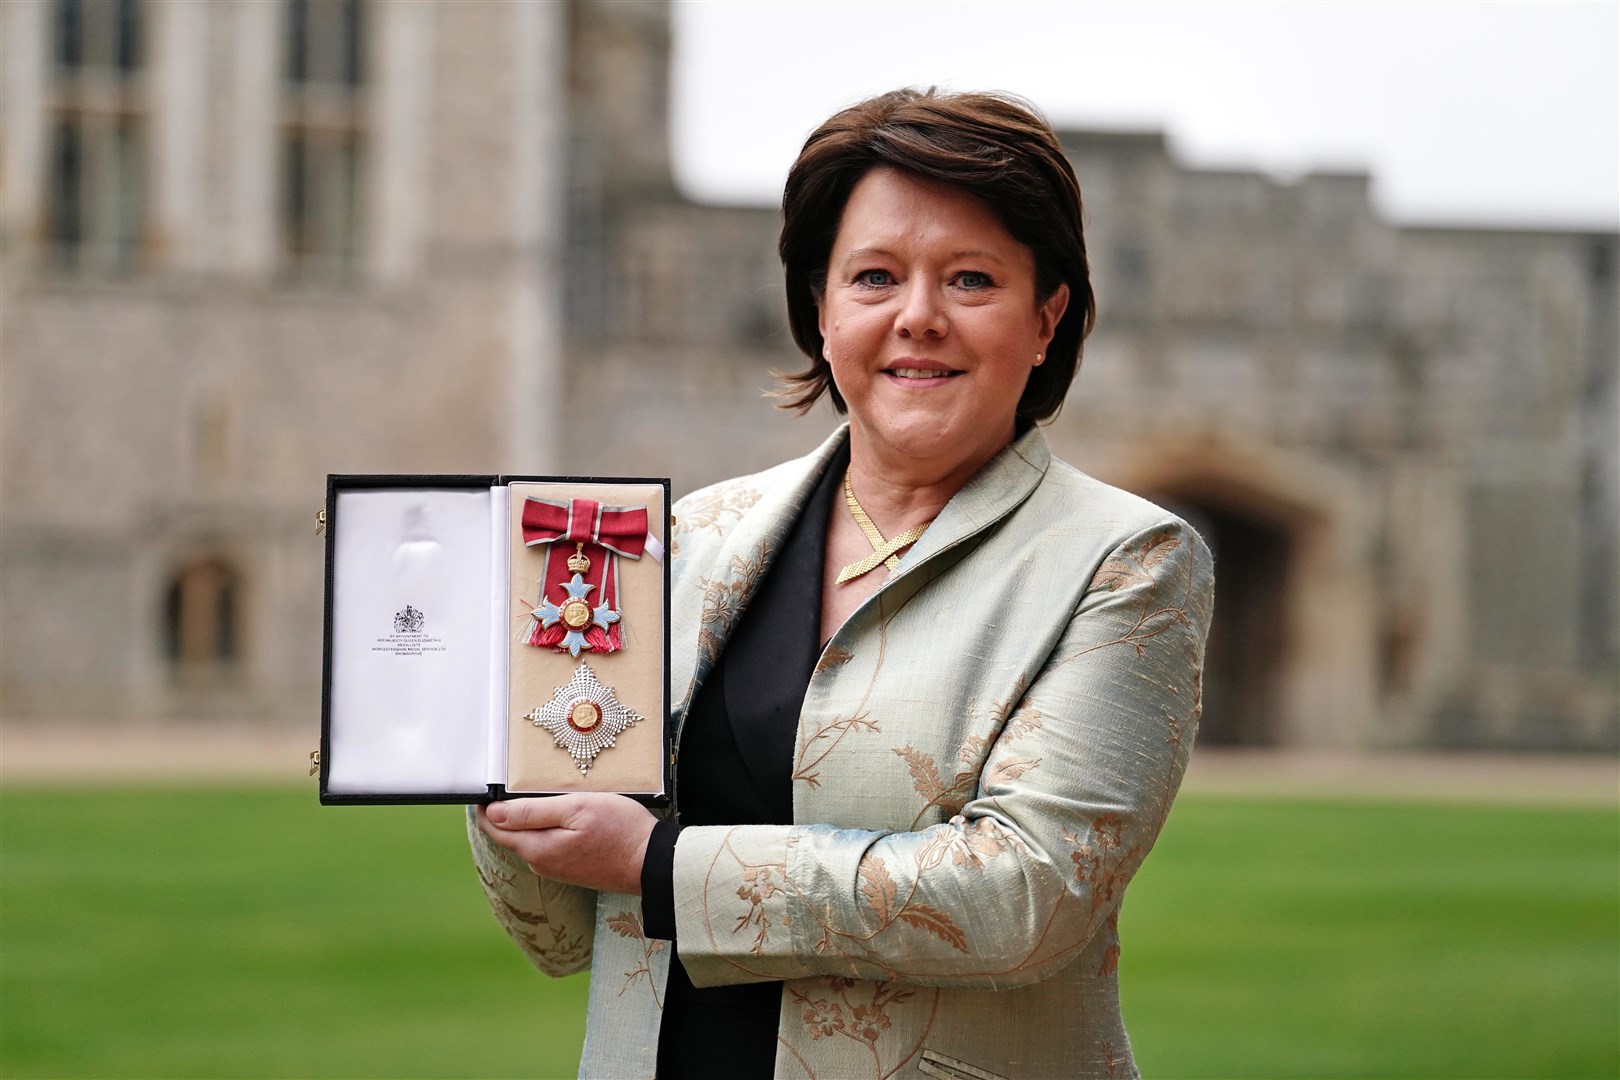 Dame Maria Miller after being made a Dame Commander of the British Empire during an investiture ceremony at Windsor Castle (Jordan Pettitt/PA)